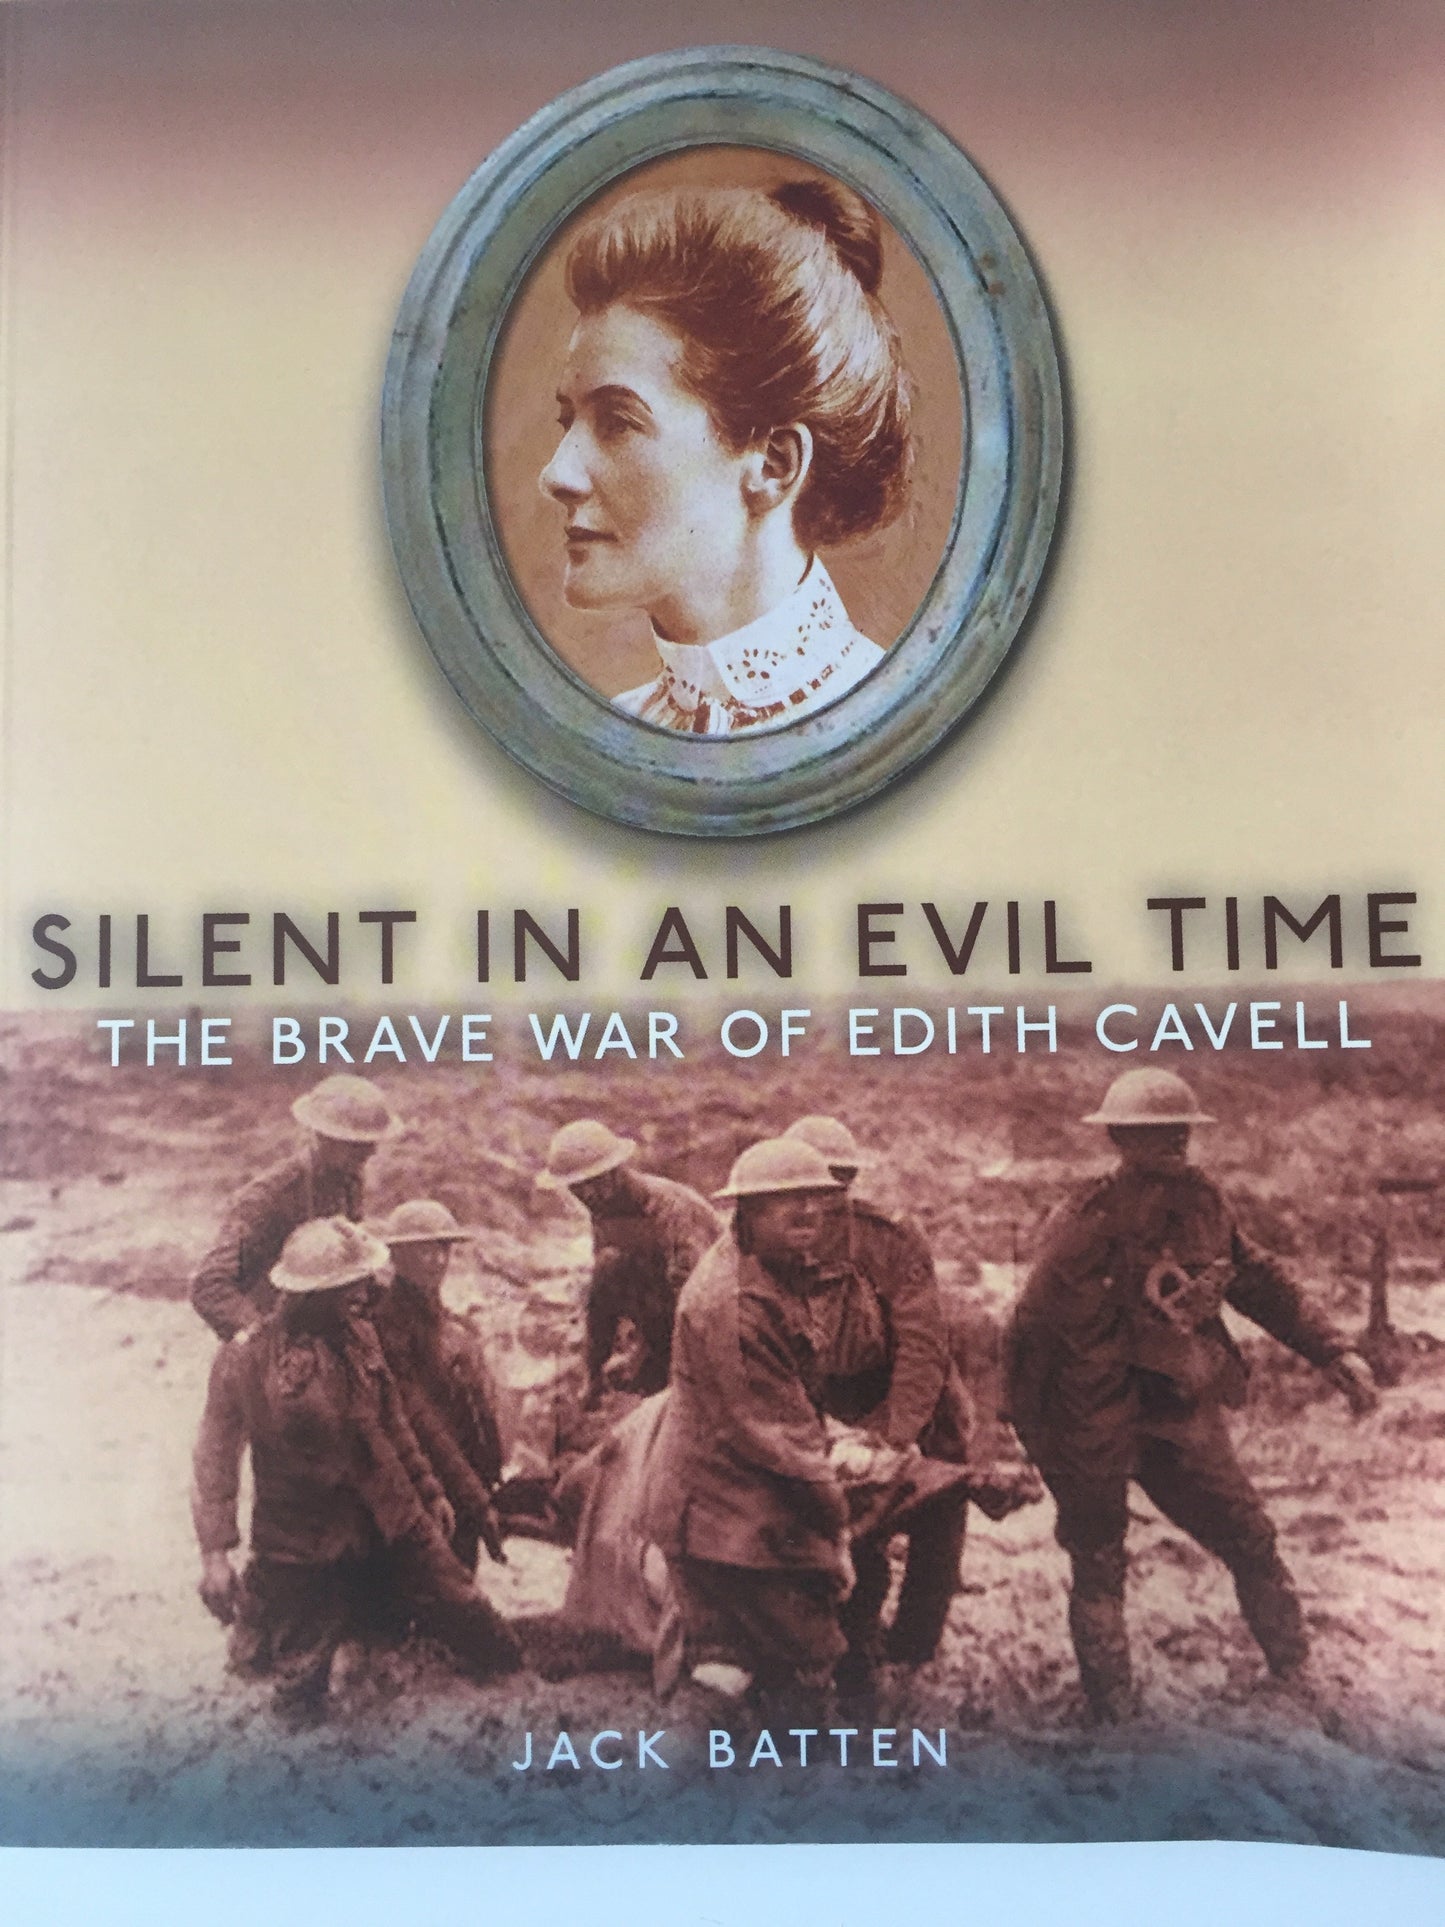 Educational Chapter Books for Older Readers - SILENT IN AN EVIL TIME